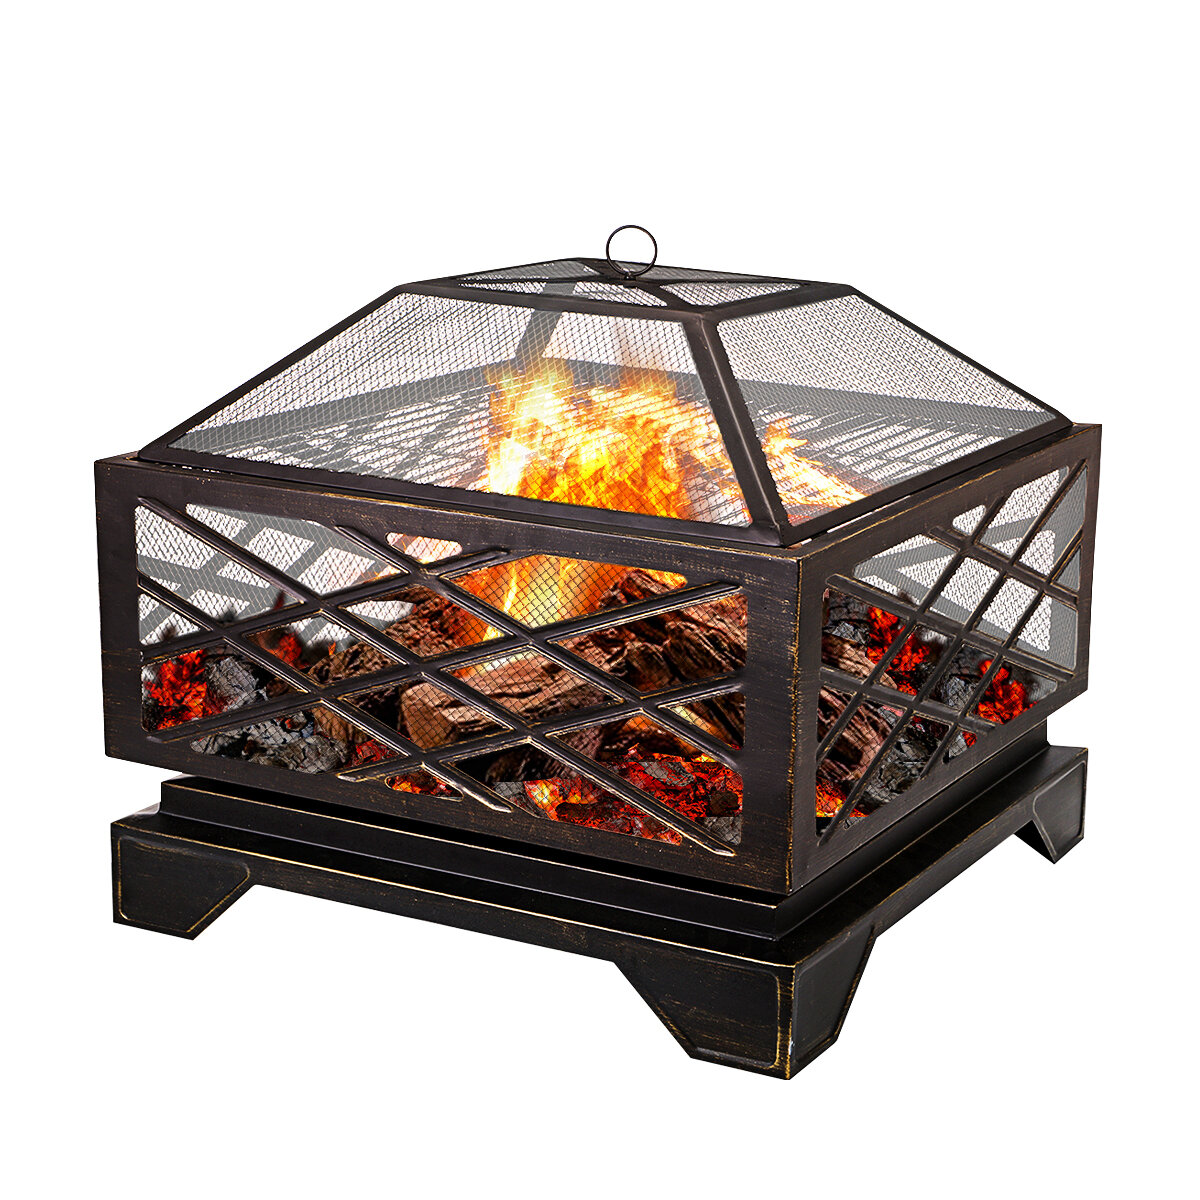 Image of Outdoor Garden Fire Pit BBQ Firepit Brazier Square Table Stove Patio